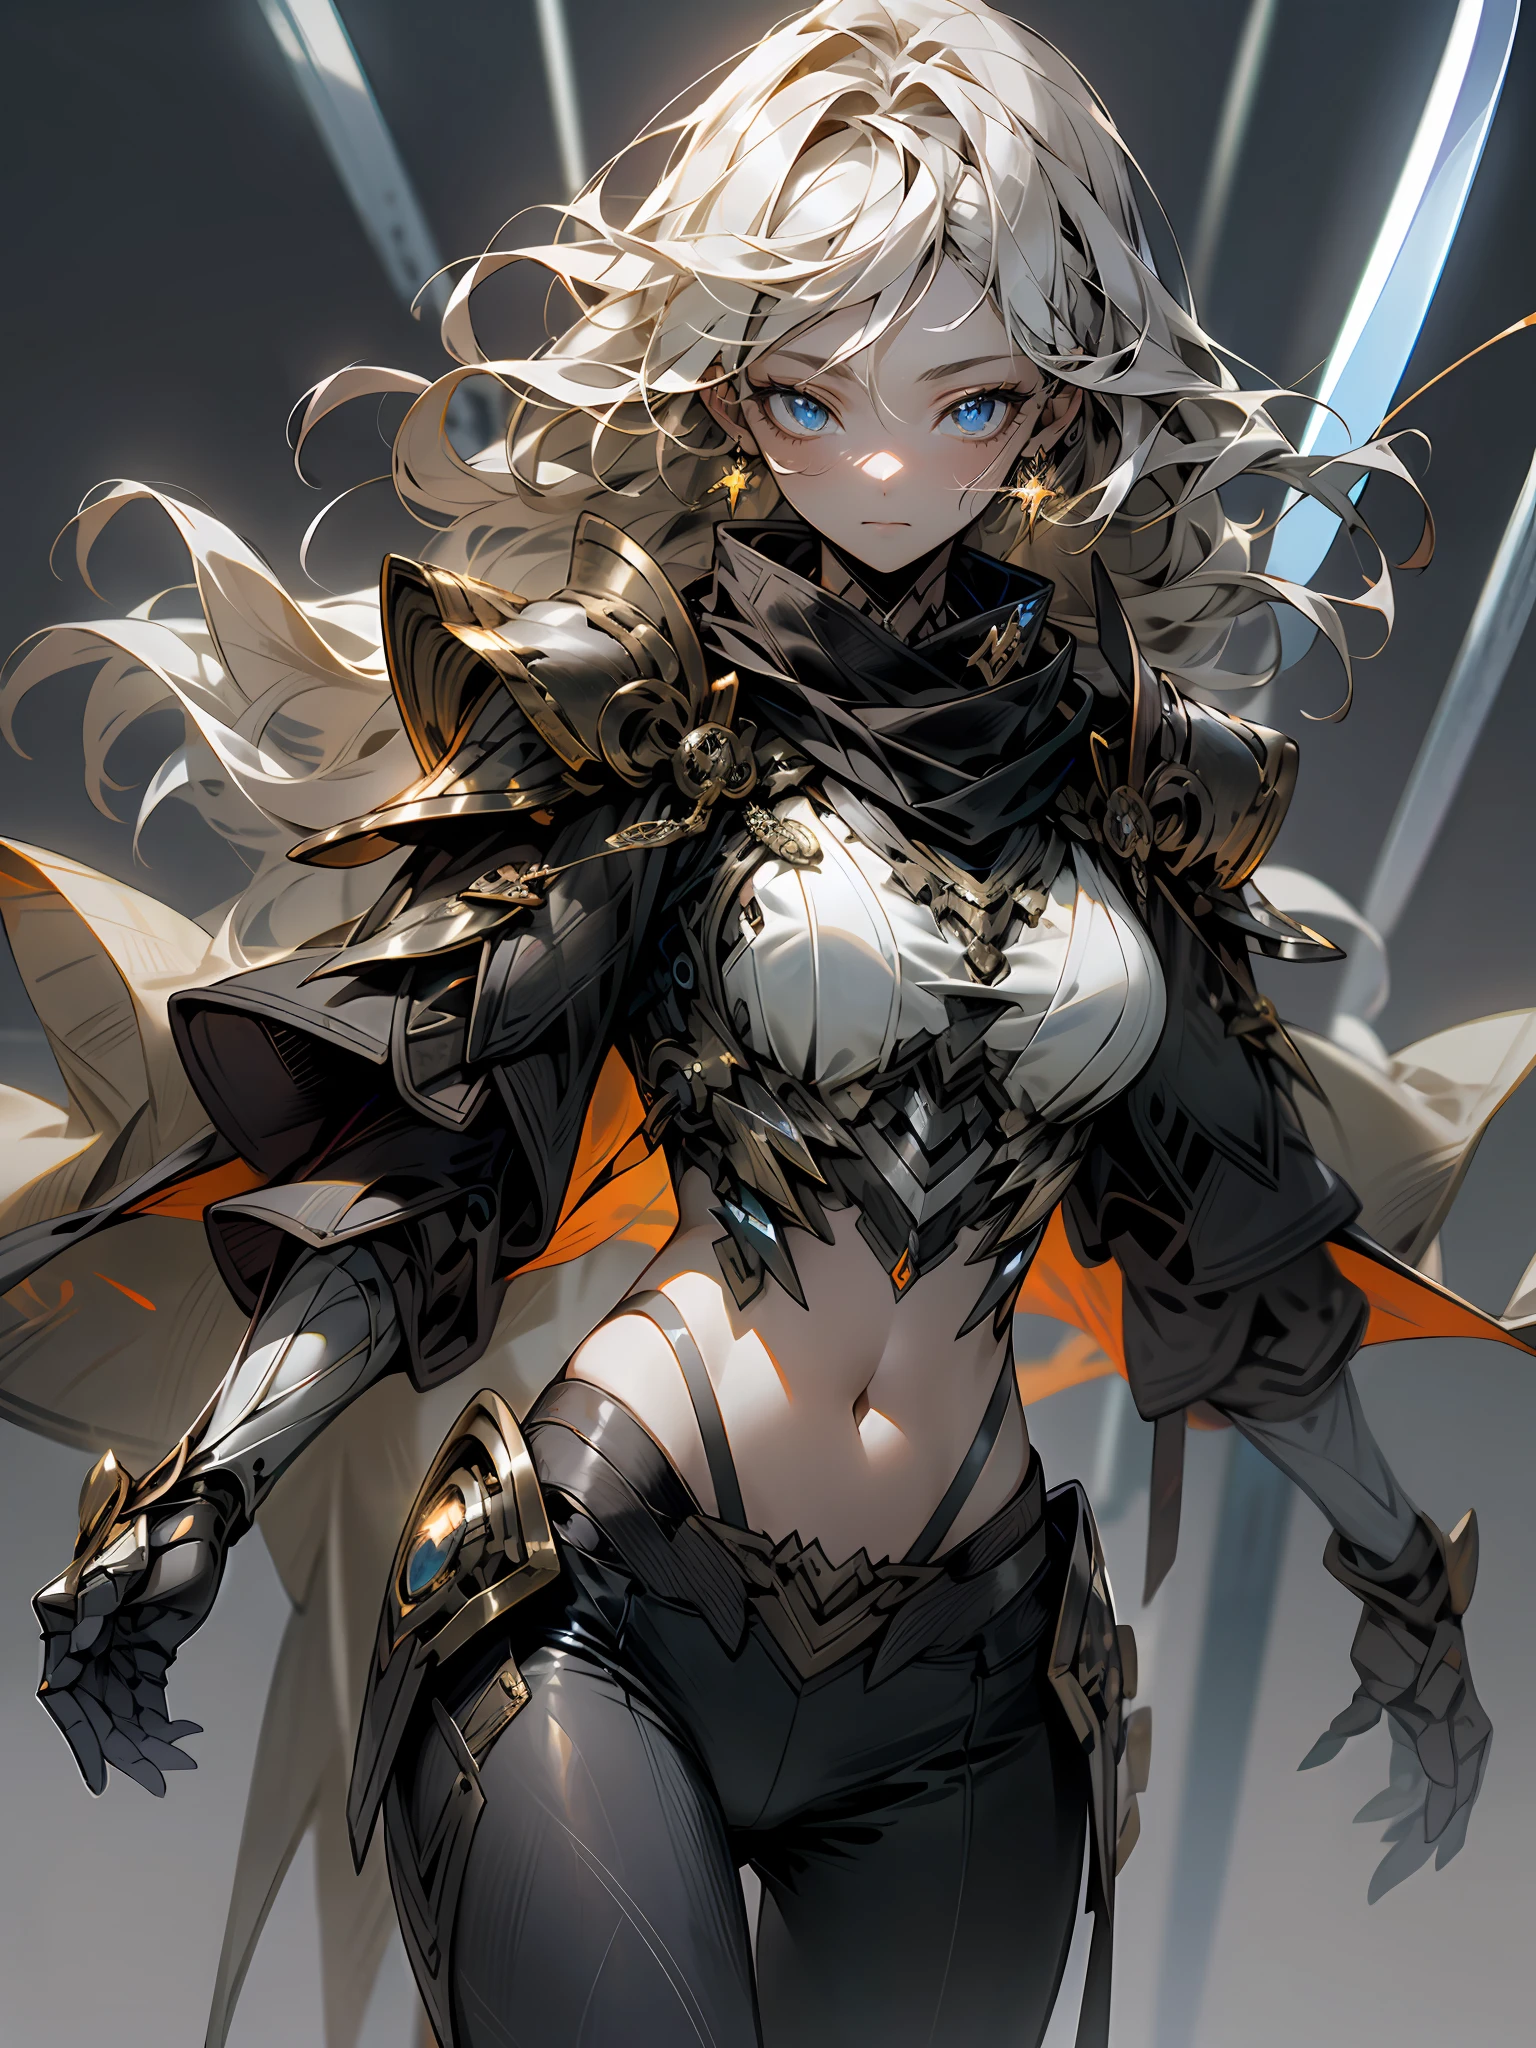 1girll, Gray sand desert, Sunset, Large breasts, Solo, Black Knight Armor, Lightning aura, Black sword, Long hair, Wavy hair, Floating hair, navel, Blue eyes, Focus, jewelry, view the viewer, Earrings, Blonde hair, standing, Light of light and shadow, Battle effect background, Warrior Gilm, intricate outfits, Hair ornaments, Sparkling eyes, Energy particles, Fighting stance, Thunder, ((Thunder Sword)), Glowing eyes, Body ignition,